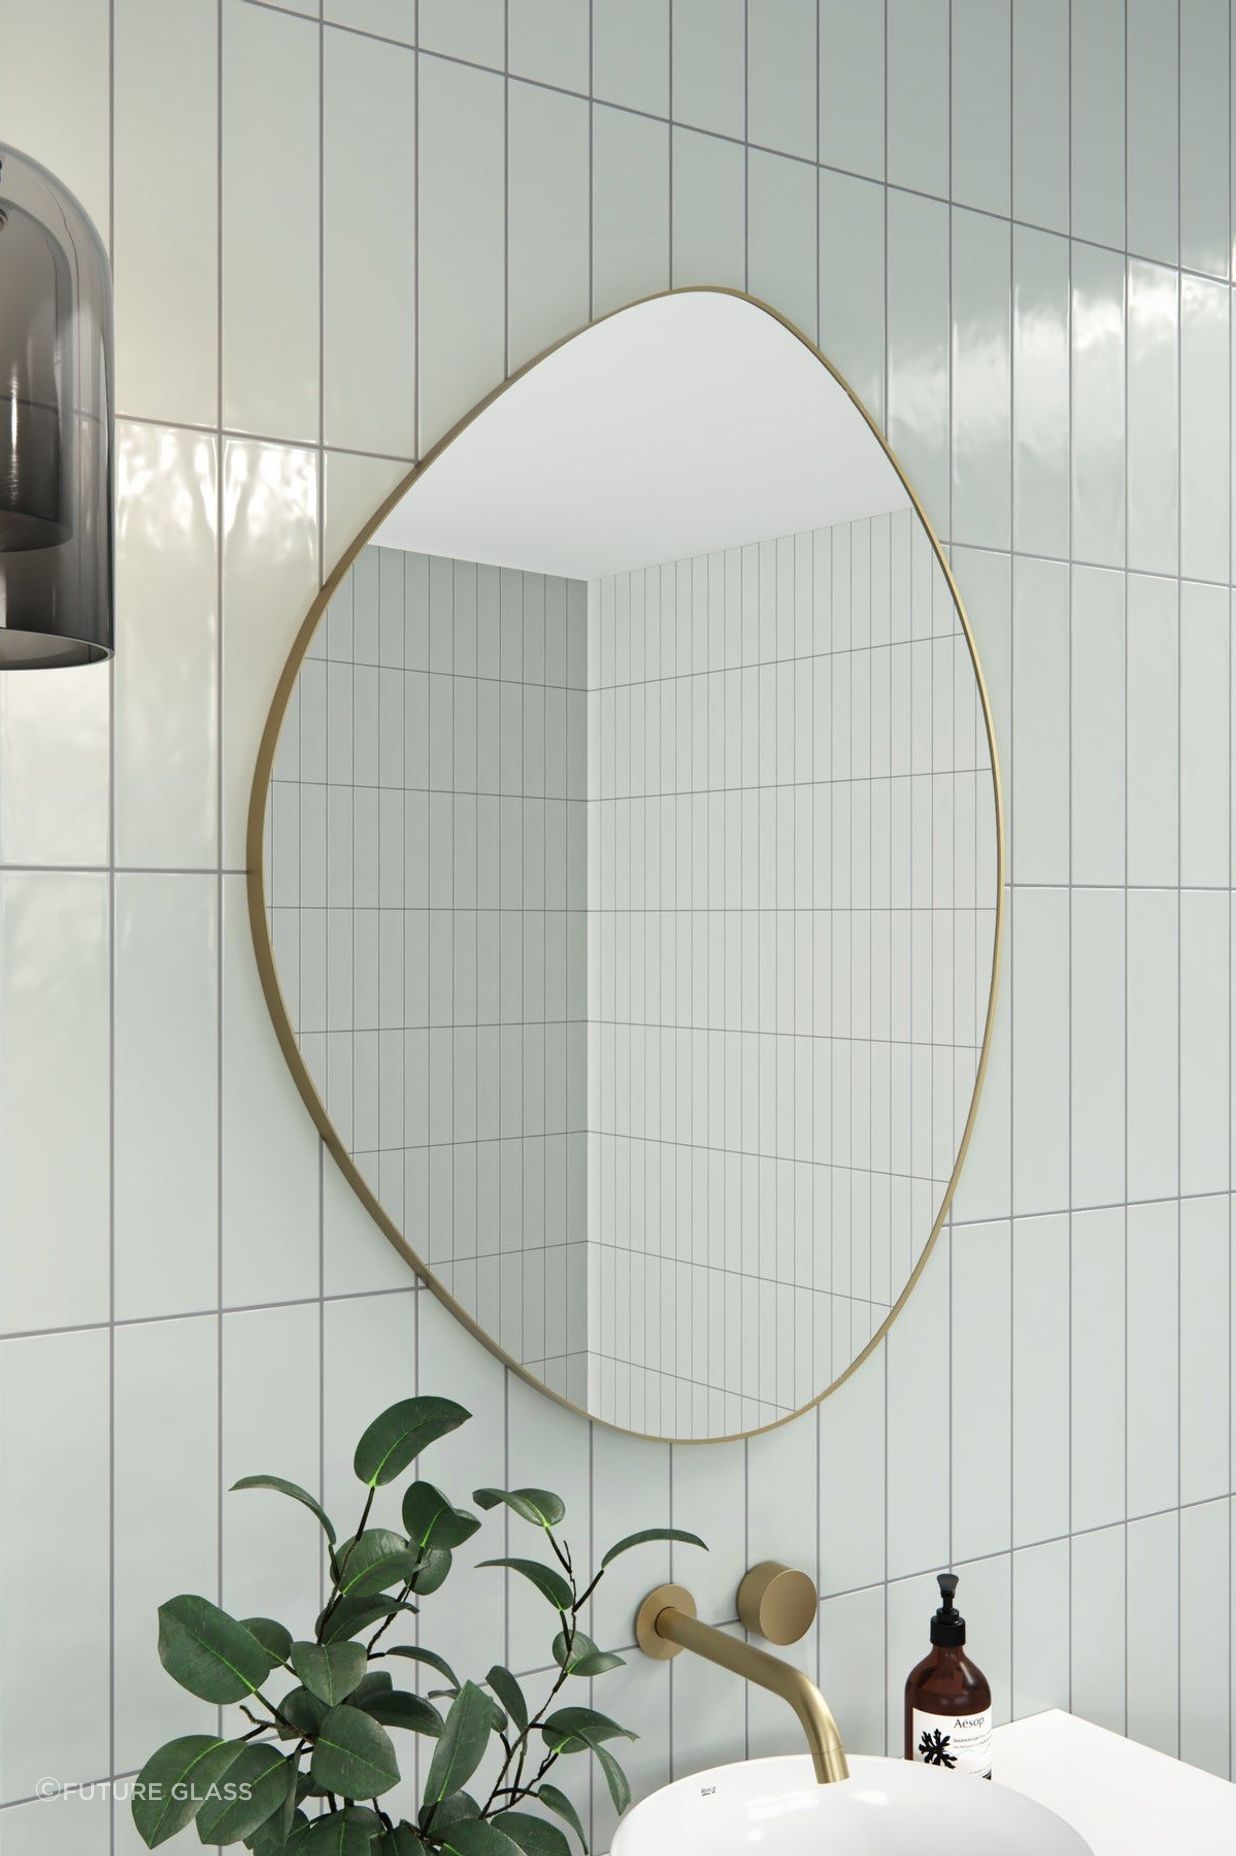 A pebble-shaped bathroom mirror offers a refreshing twist on traditional bathroom mirror shapes. Featured product: Pebble Shape Mirror